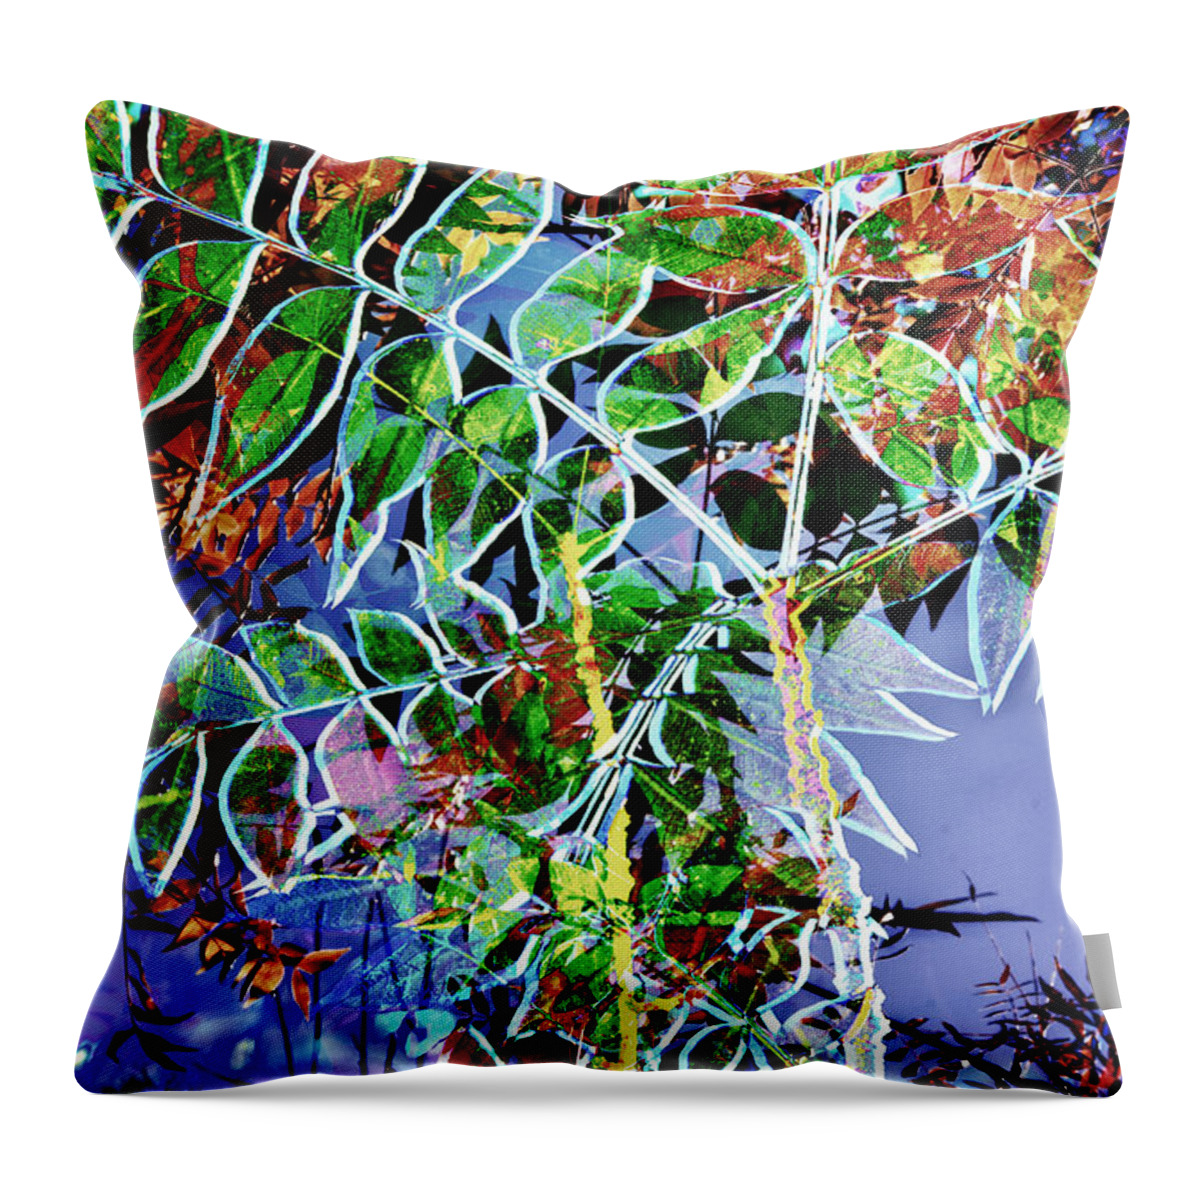 Fall Colors Throw Pillow featuring the digital art Fall Color Collage by Georgianne Giese